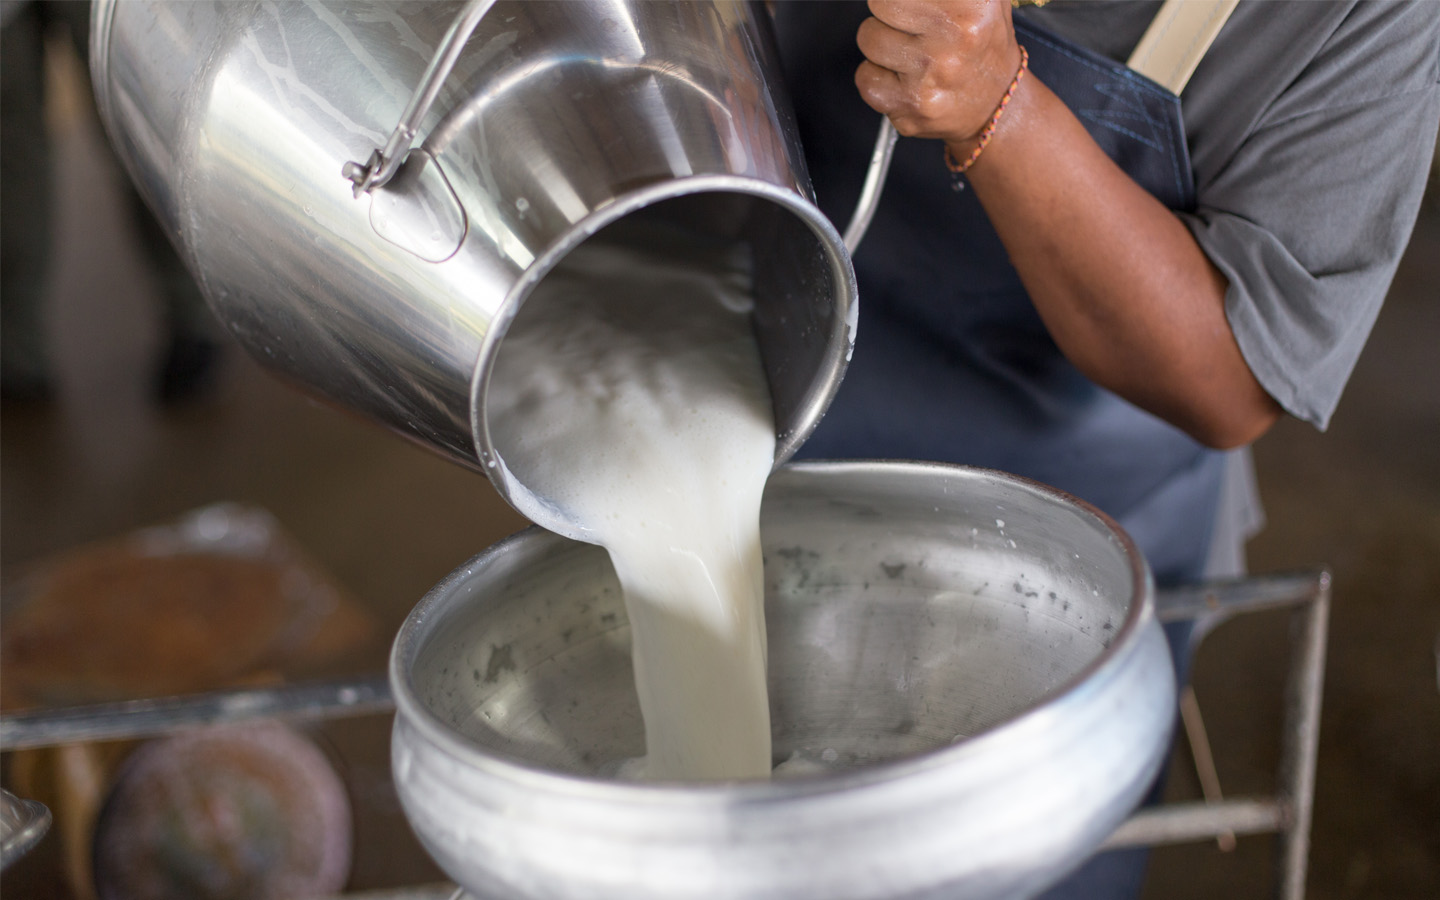 Pouring milk into a bowl